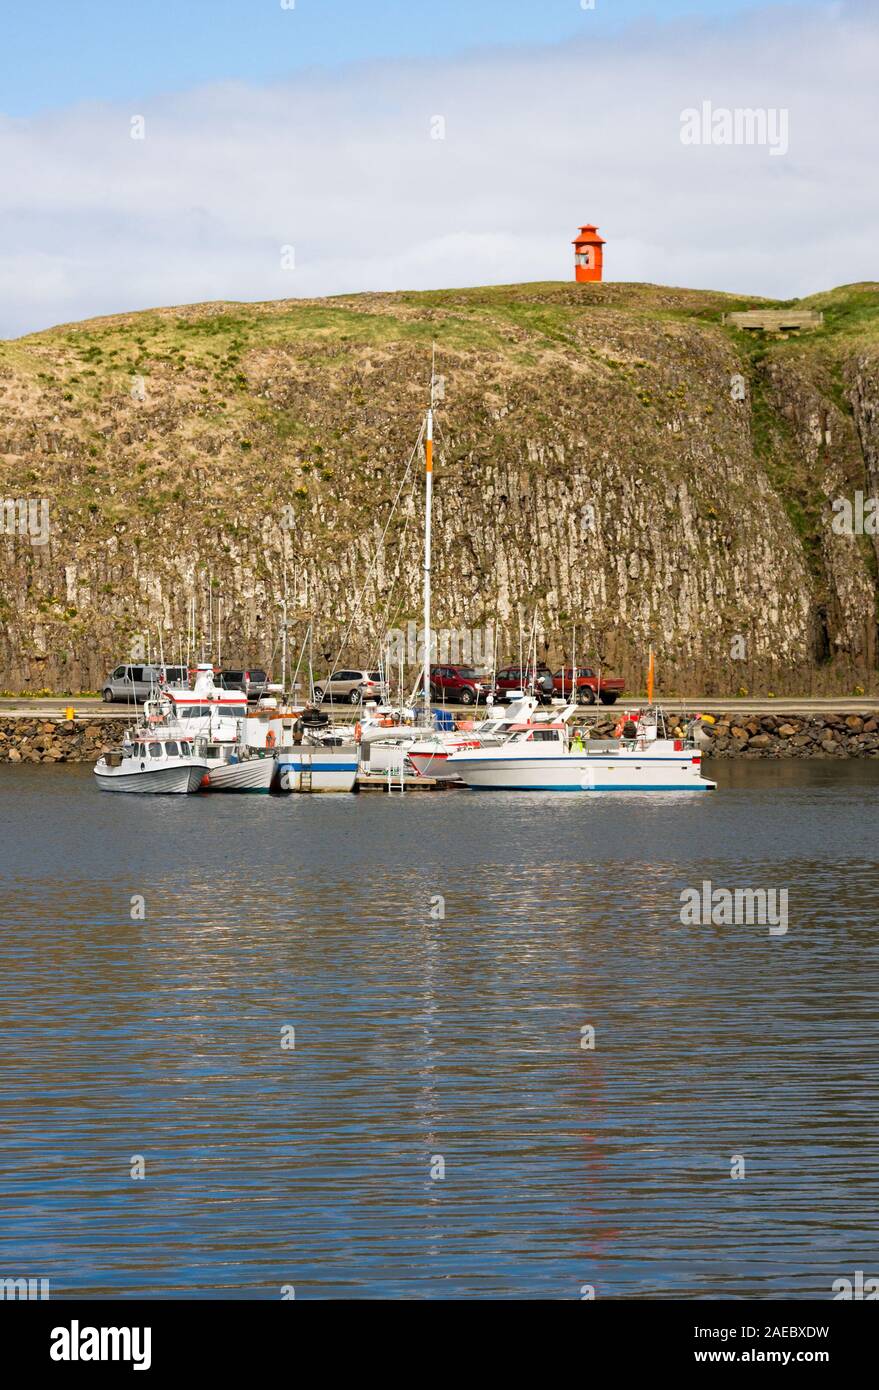 Part of the small harbor of Stykkisholmur with the famous little red lighthouse, Iceland. Stock Photo